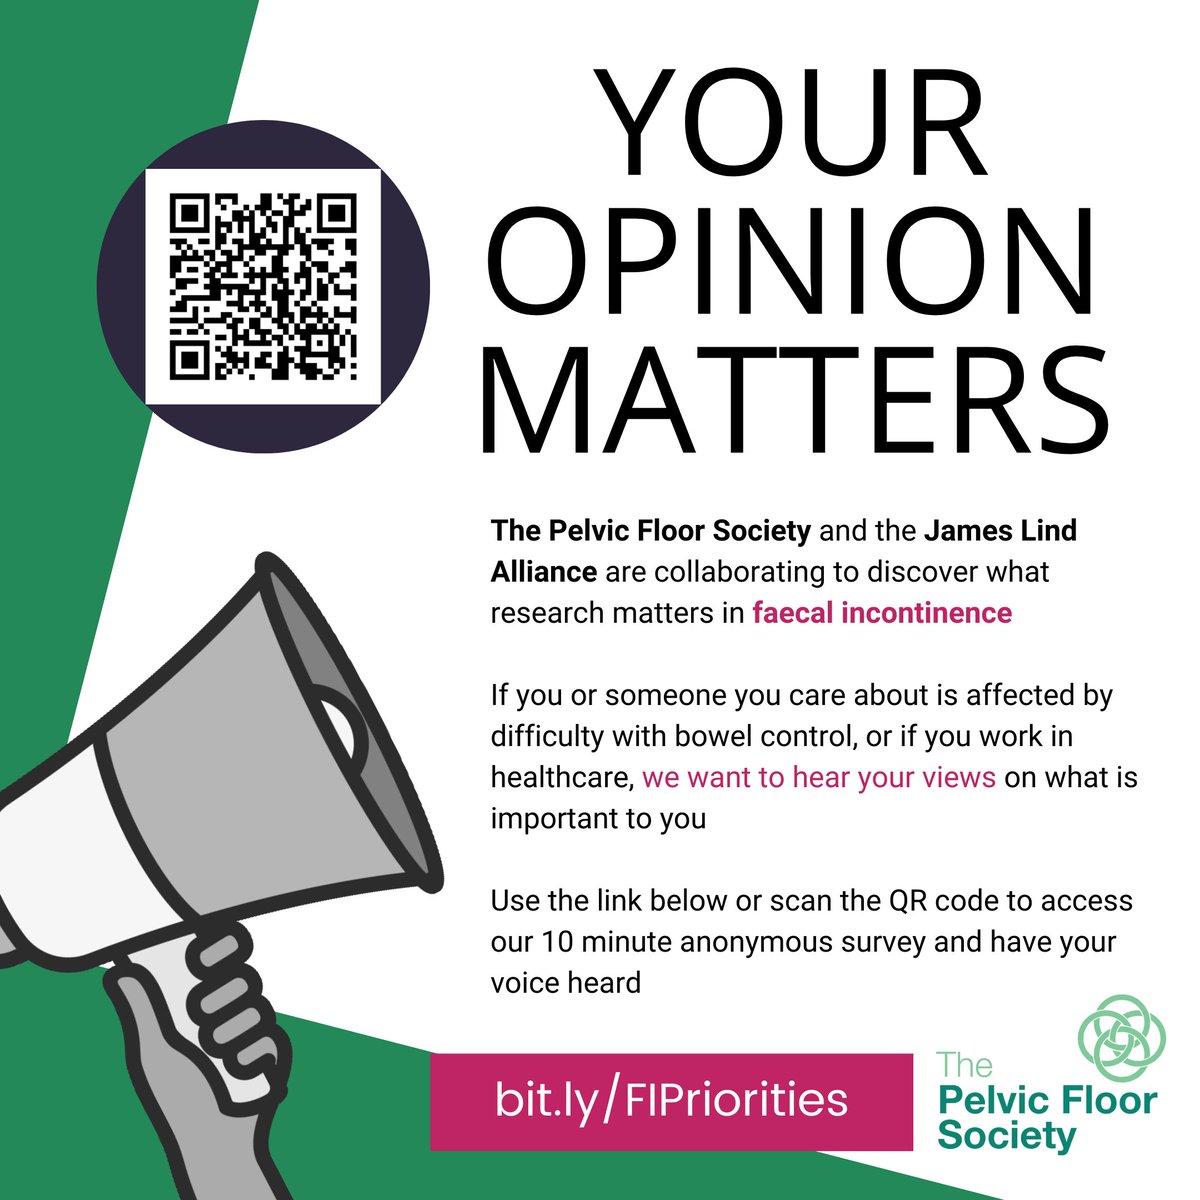 What questions do you have about faecal incontinence or bowel accidents? 

Have your say: bit.ly/FIPriorities

#FIResearchPriorities #faecalincontinence #bowelincontinence #obstetricanalsphincterinjury 

@LindAlliance @TPFSuk